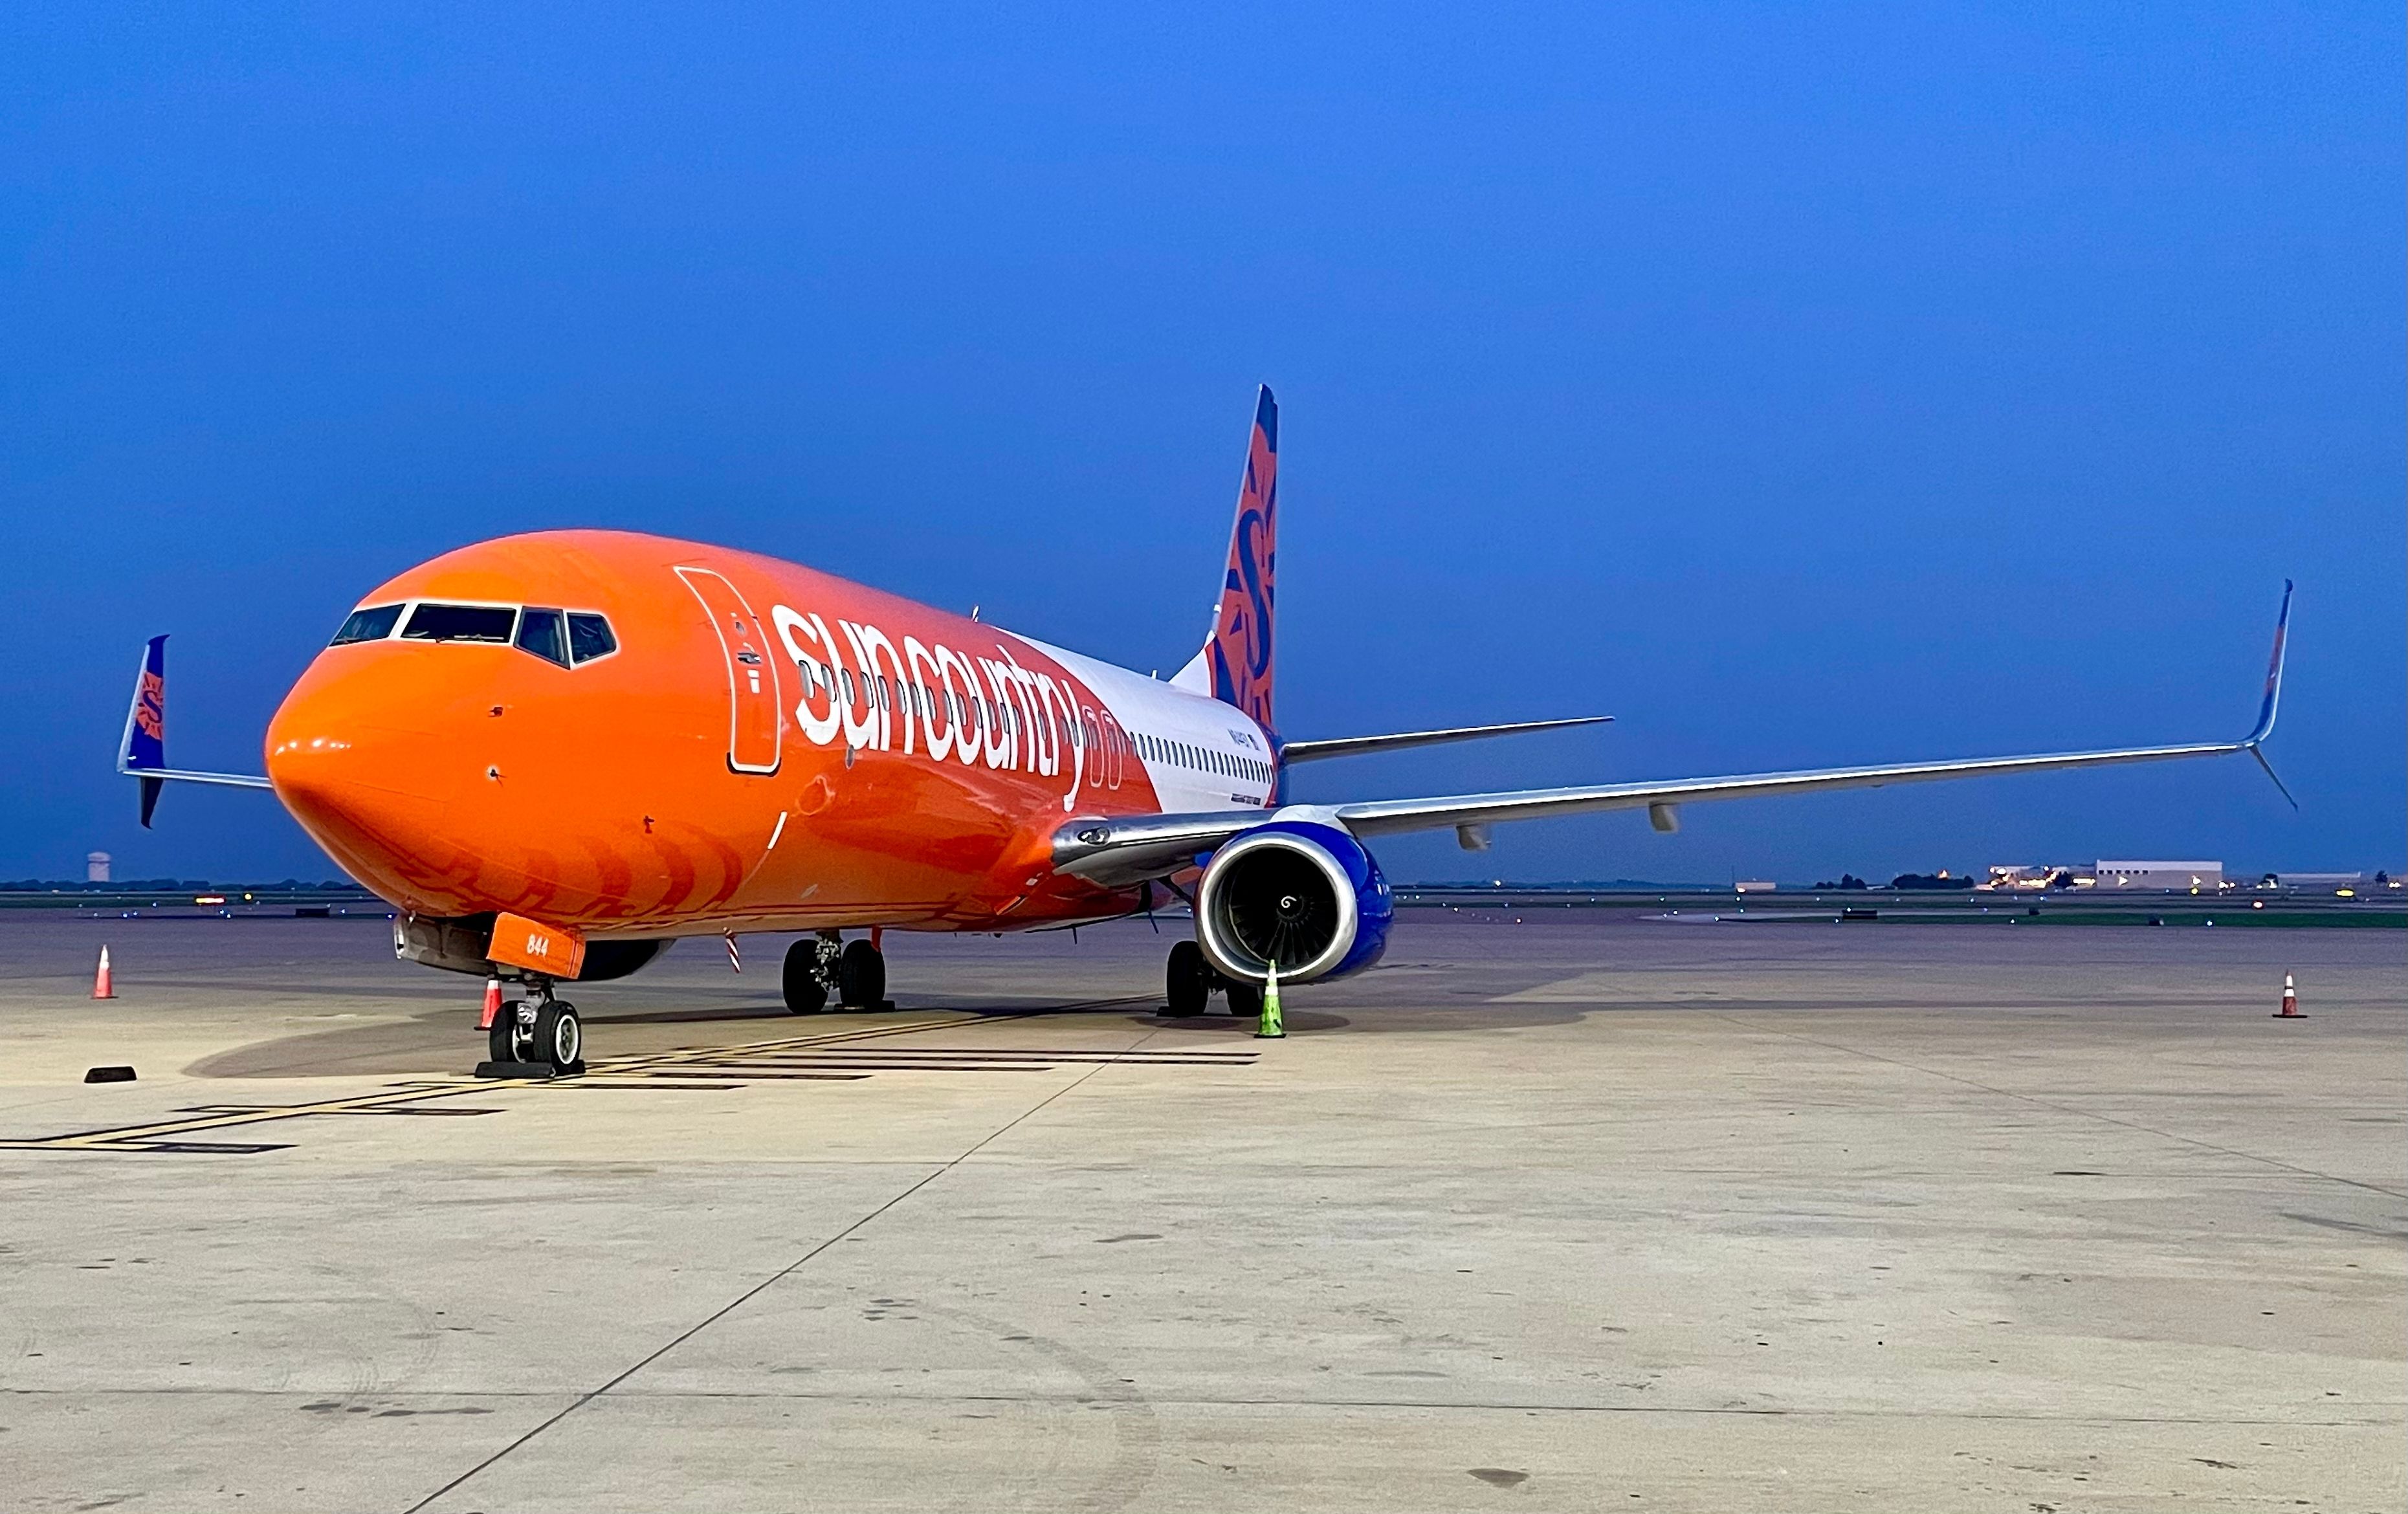 A Sun Country Airlines Boeing 737 parked at Dallas Fort Worth